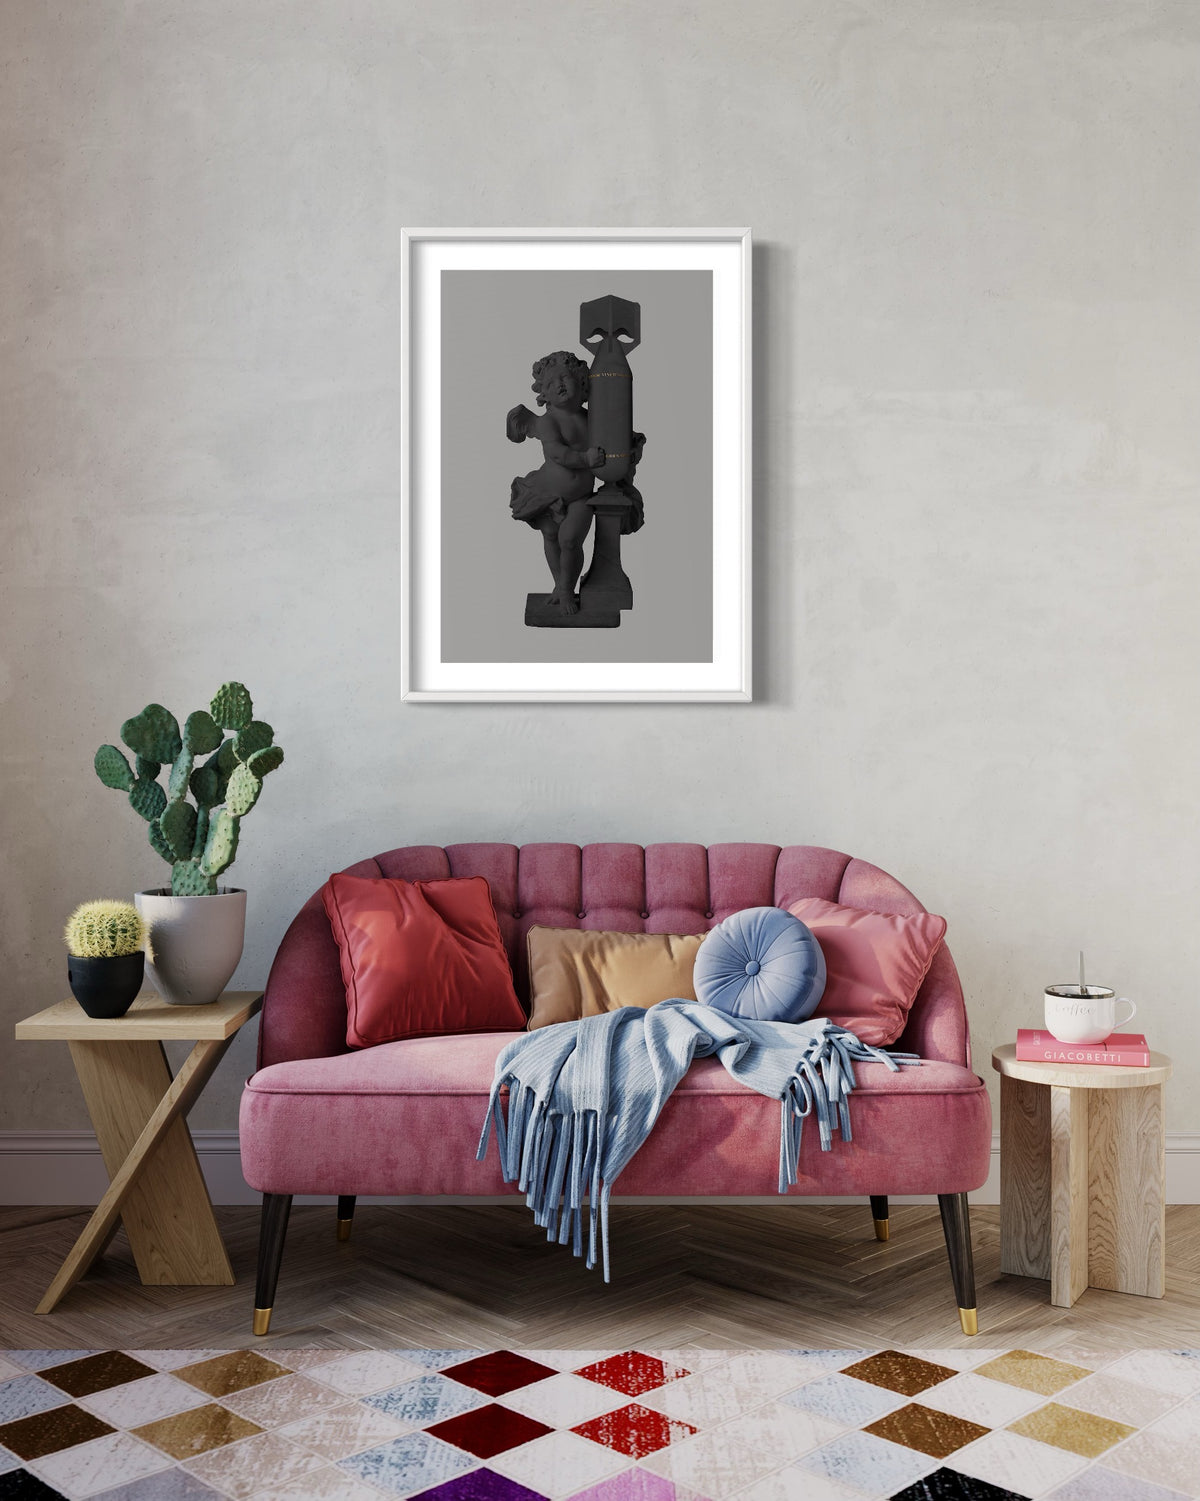 CUPID (AMOR VINCIT OMNIA)Shadow Of The Moon Special Edition - (Framed)